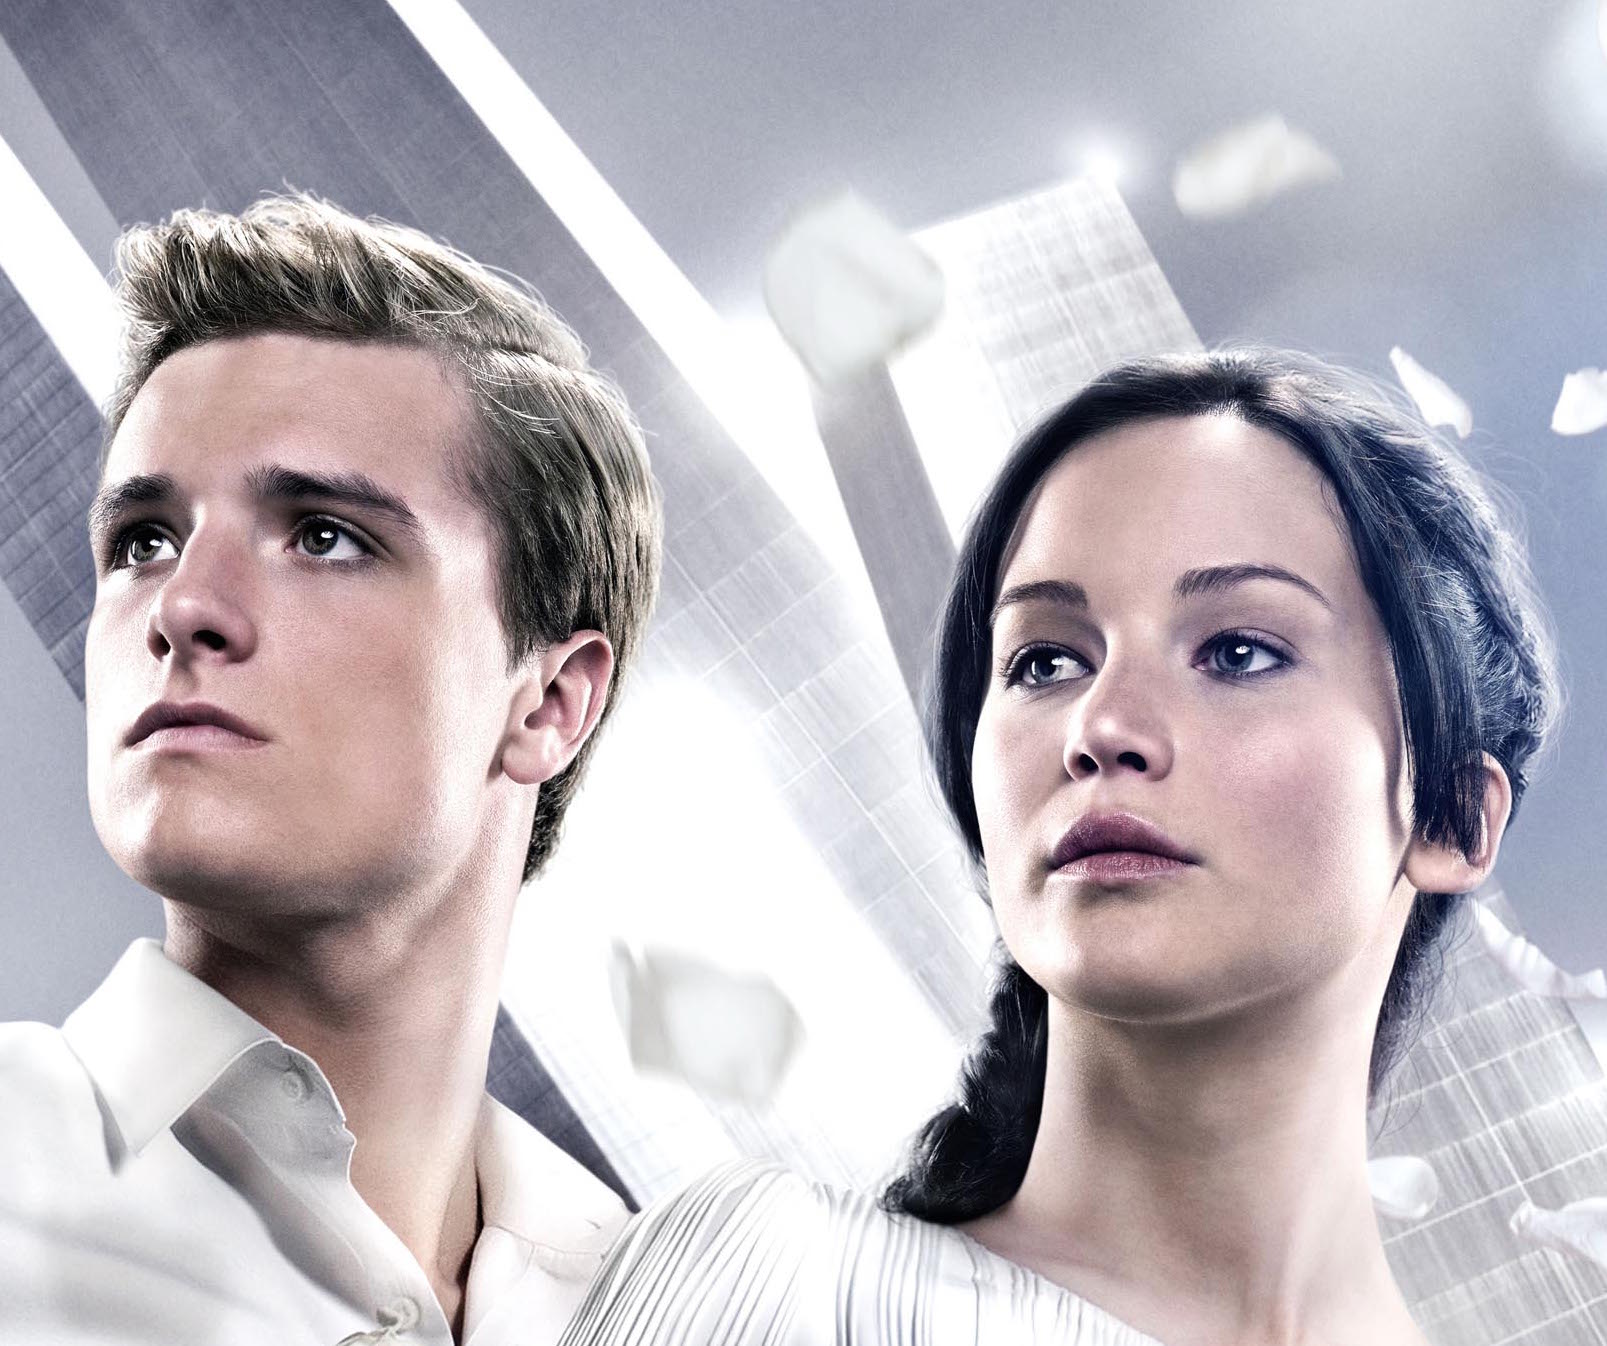 Image of a young man and woman dressed in white with nice features and highlights in the image.